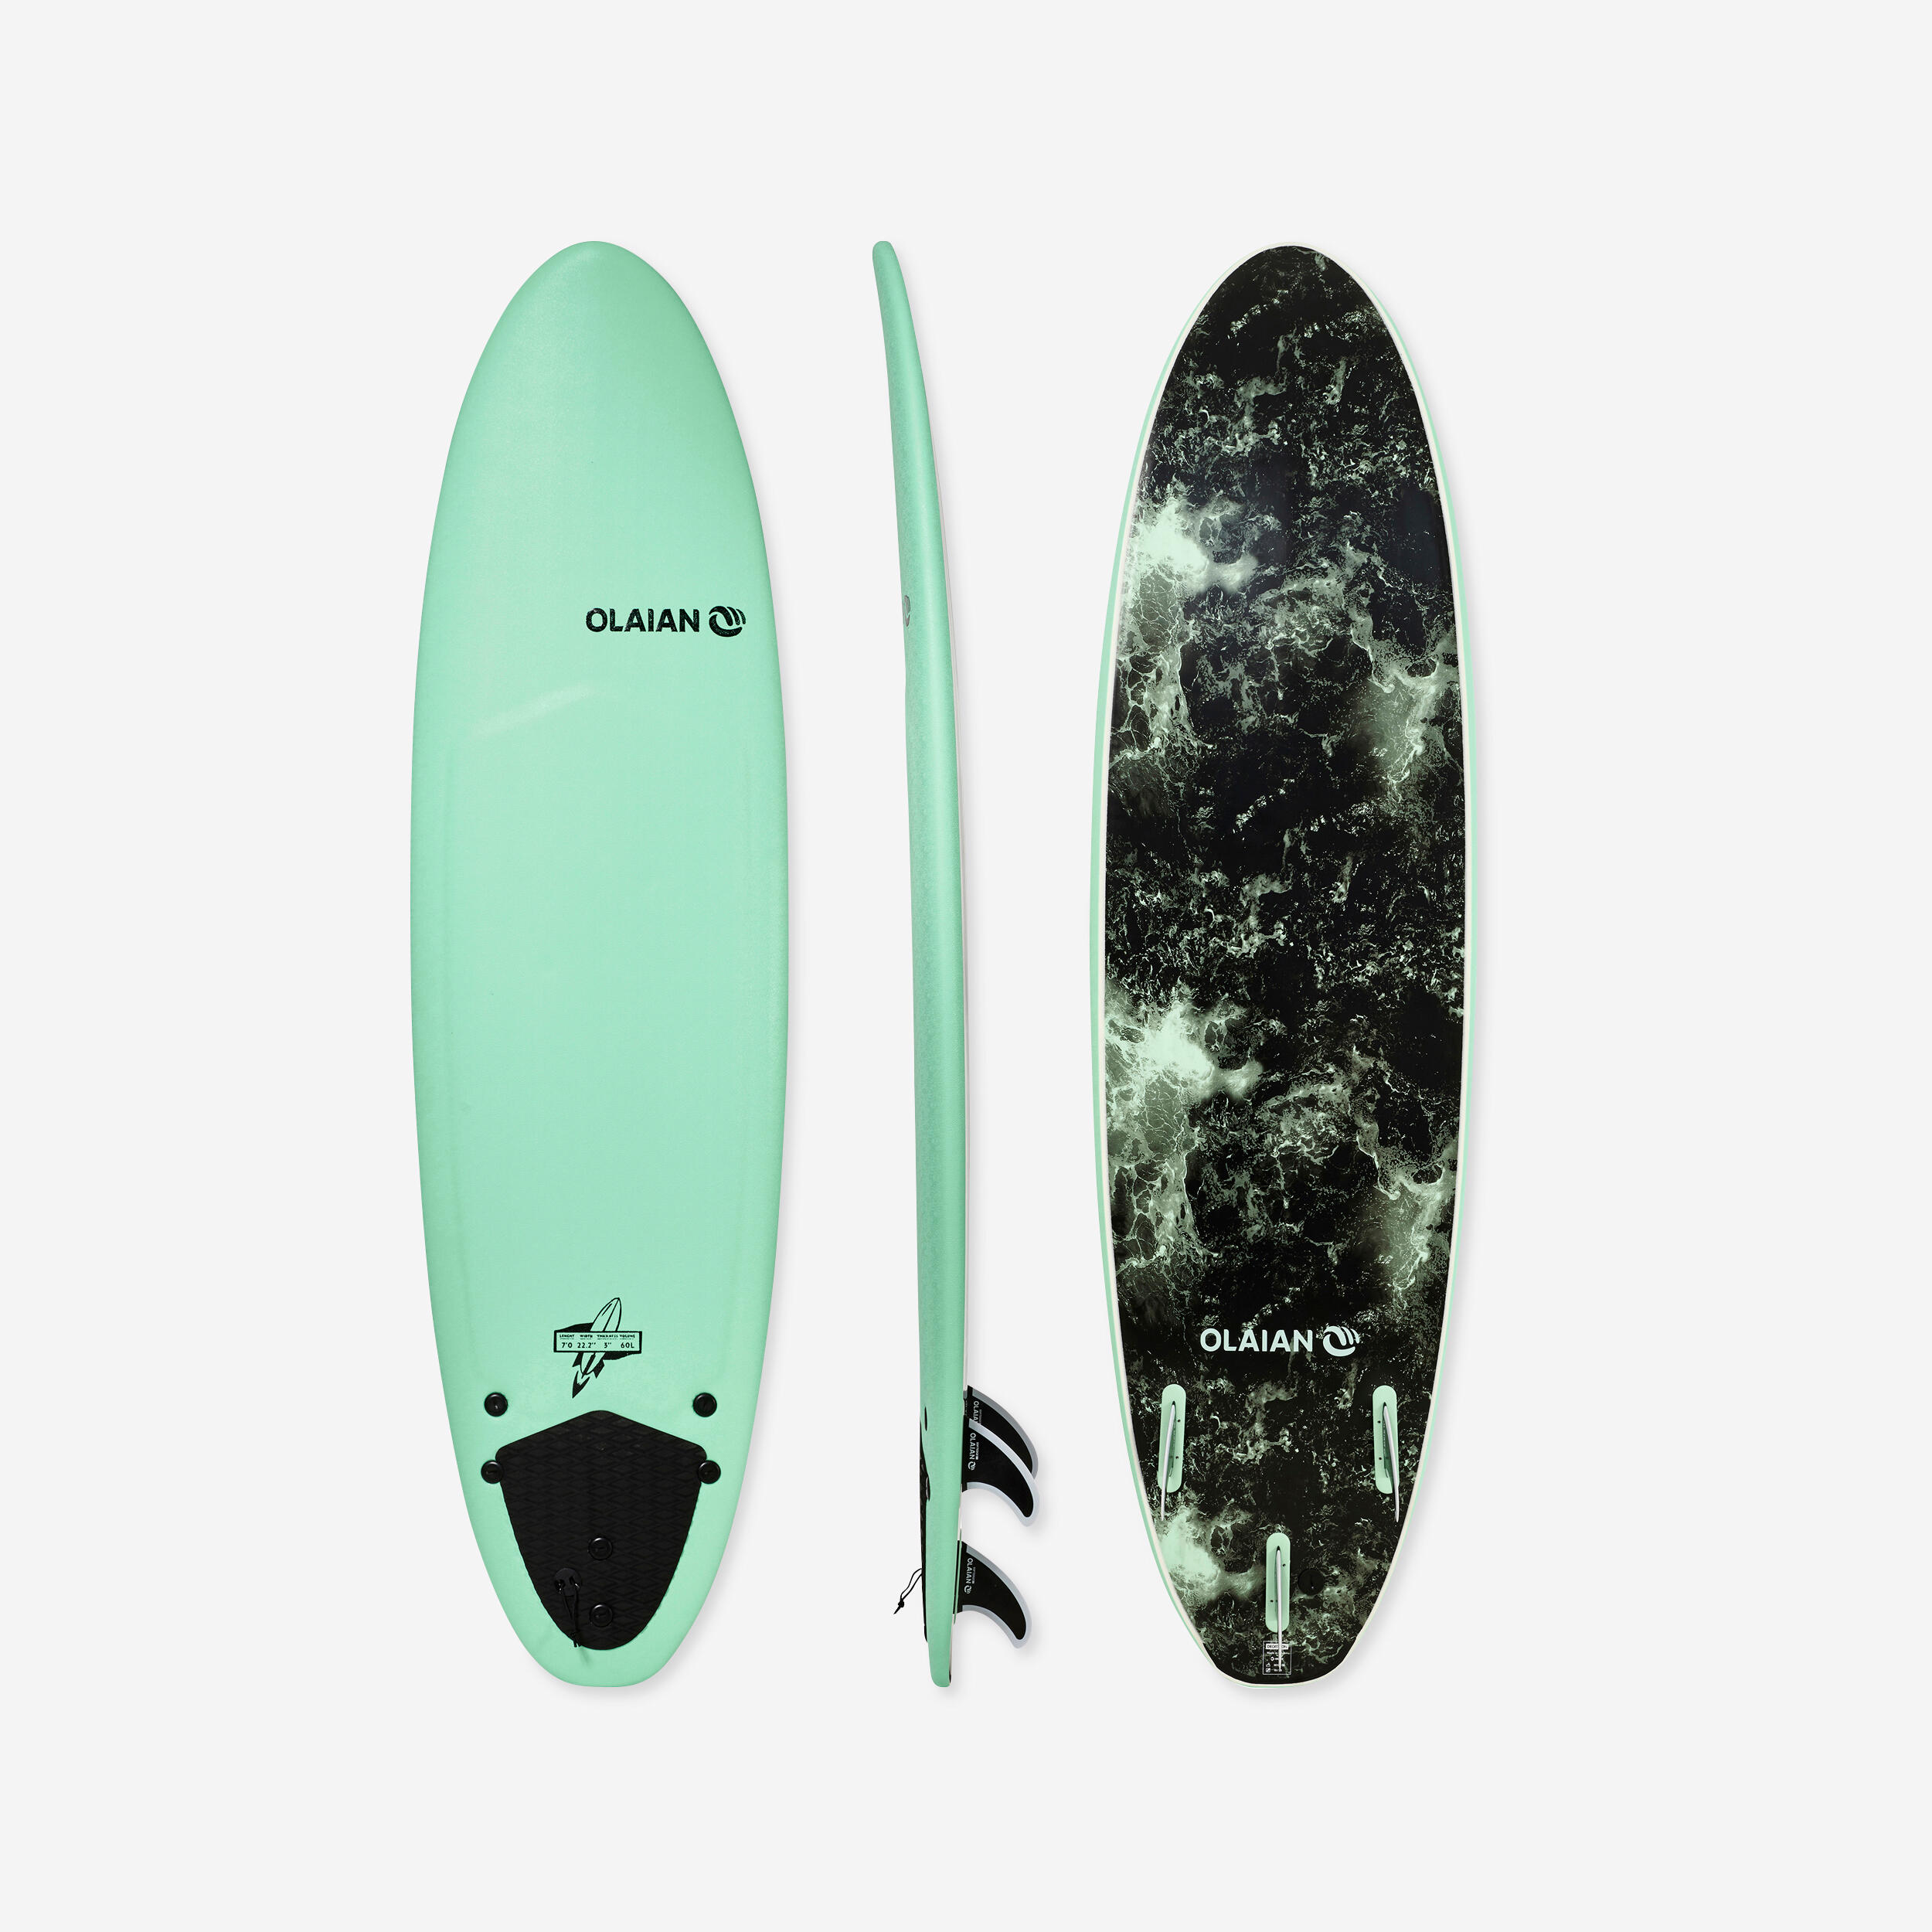 OLAIAN FOAM SURFBOARD 900 7’ . Comes with 3 fins.